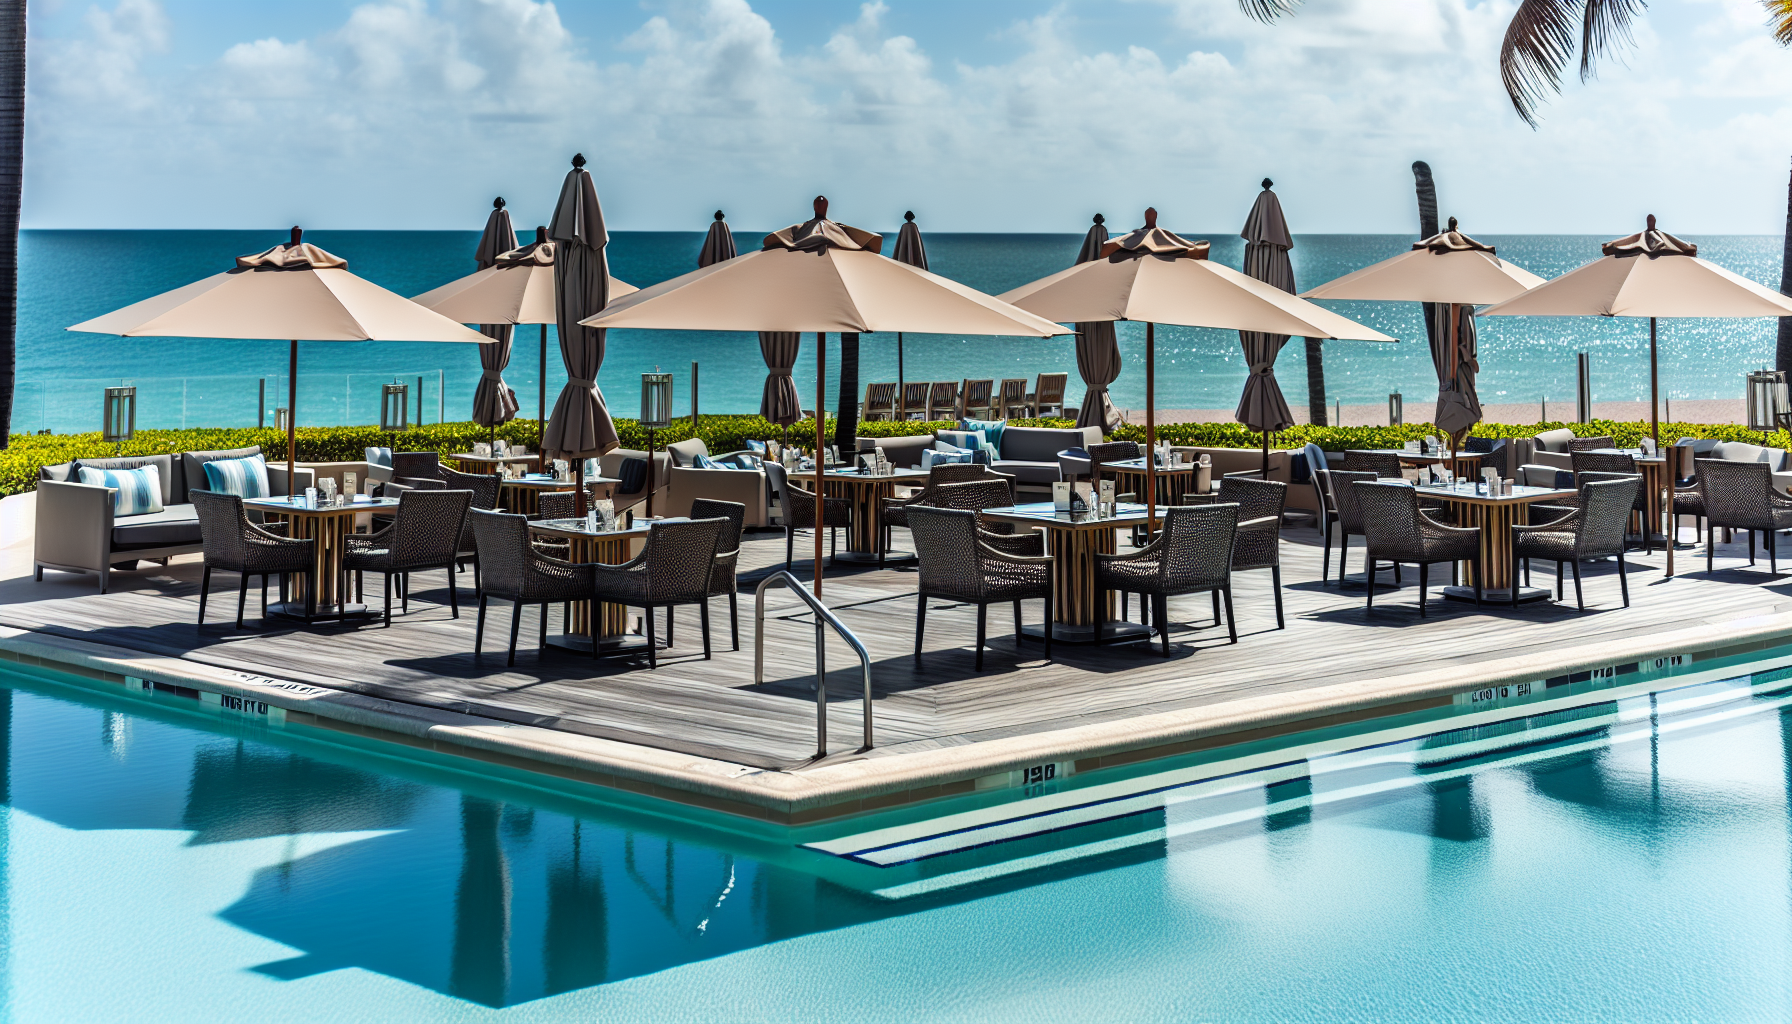 Relaxing poolside café with oceanfront view at Ritz Carlton Fort Lauderdale